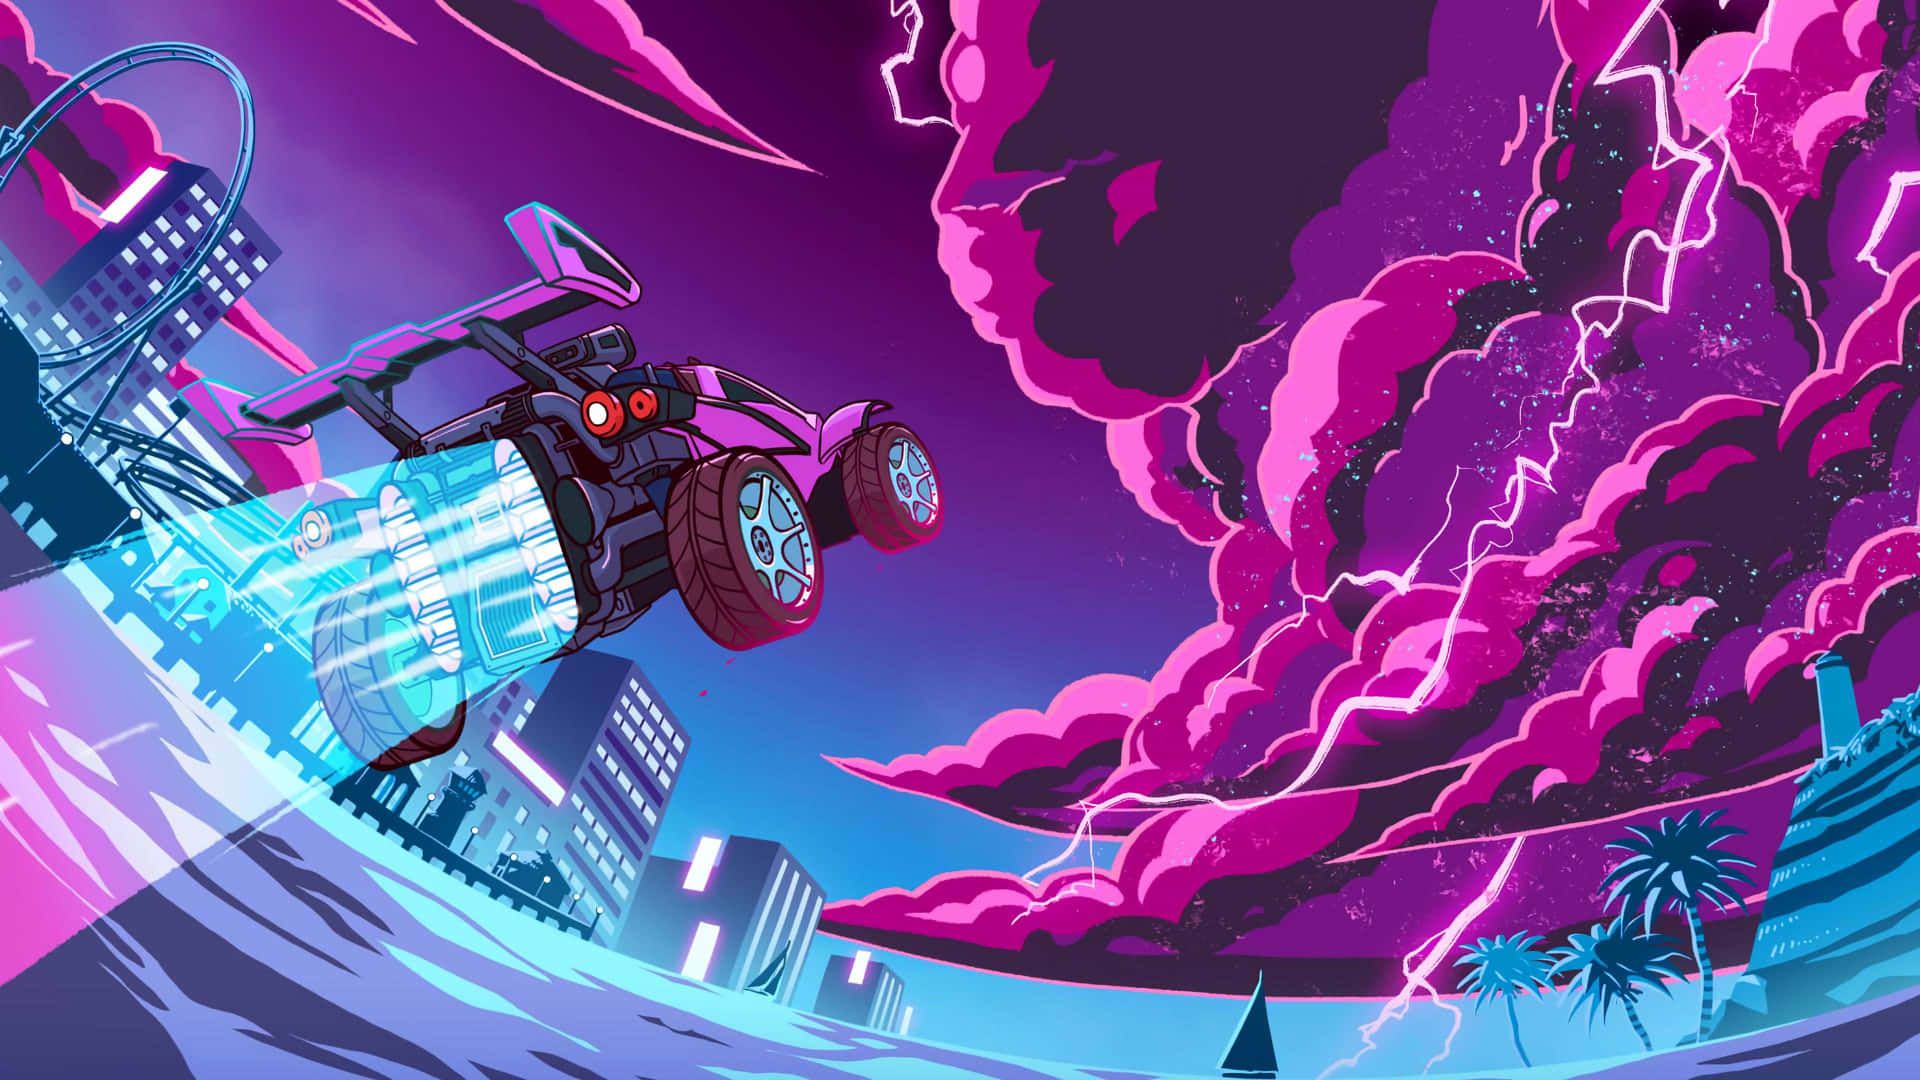 Download A Purple Car Driving Through A City With Lightning Wallpaper